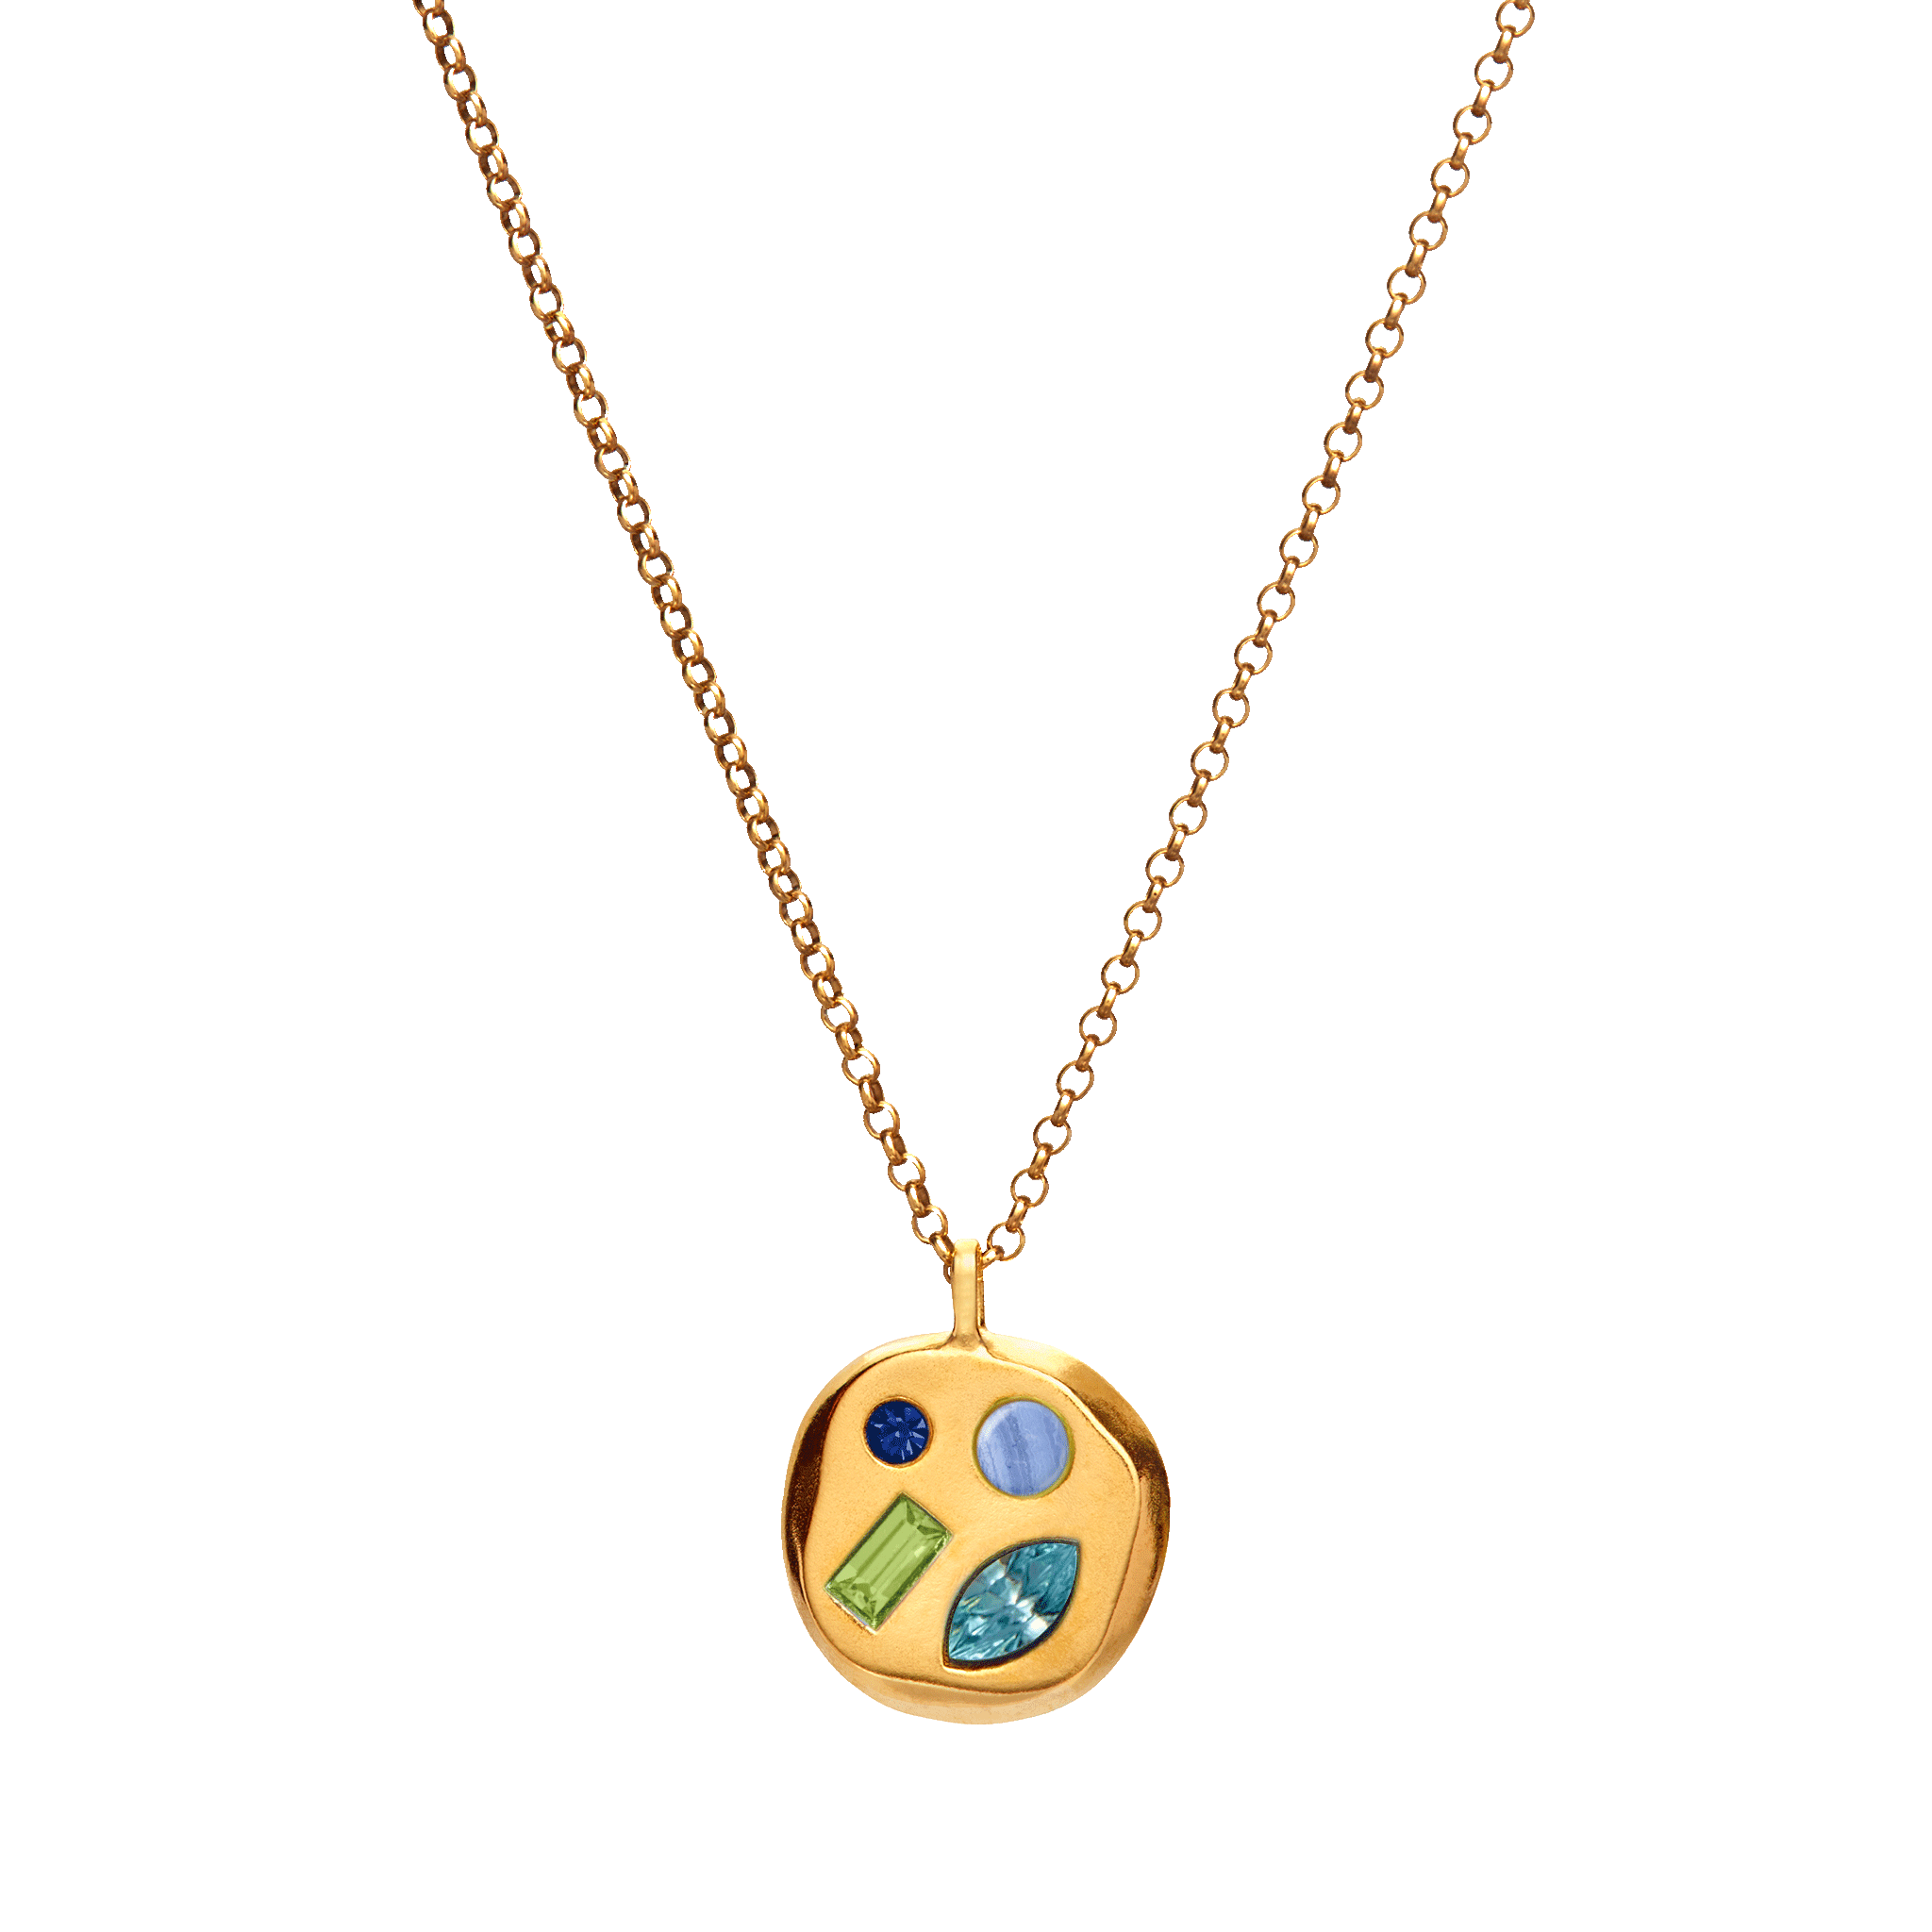 The March Second Pendant